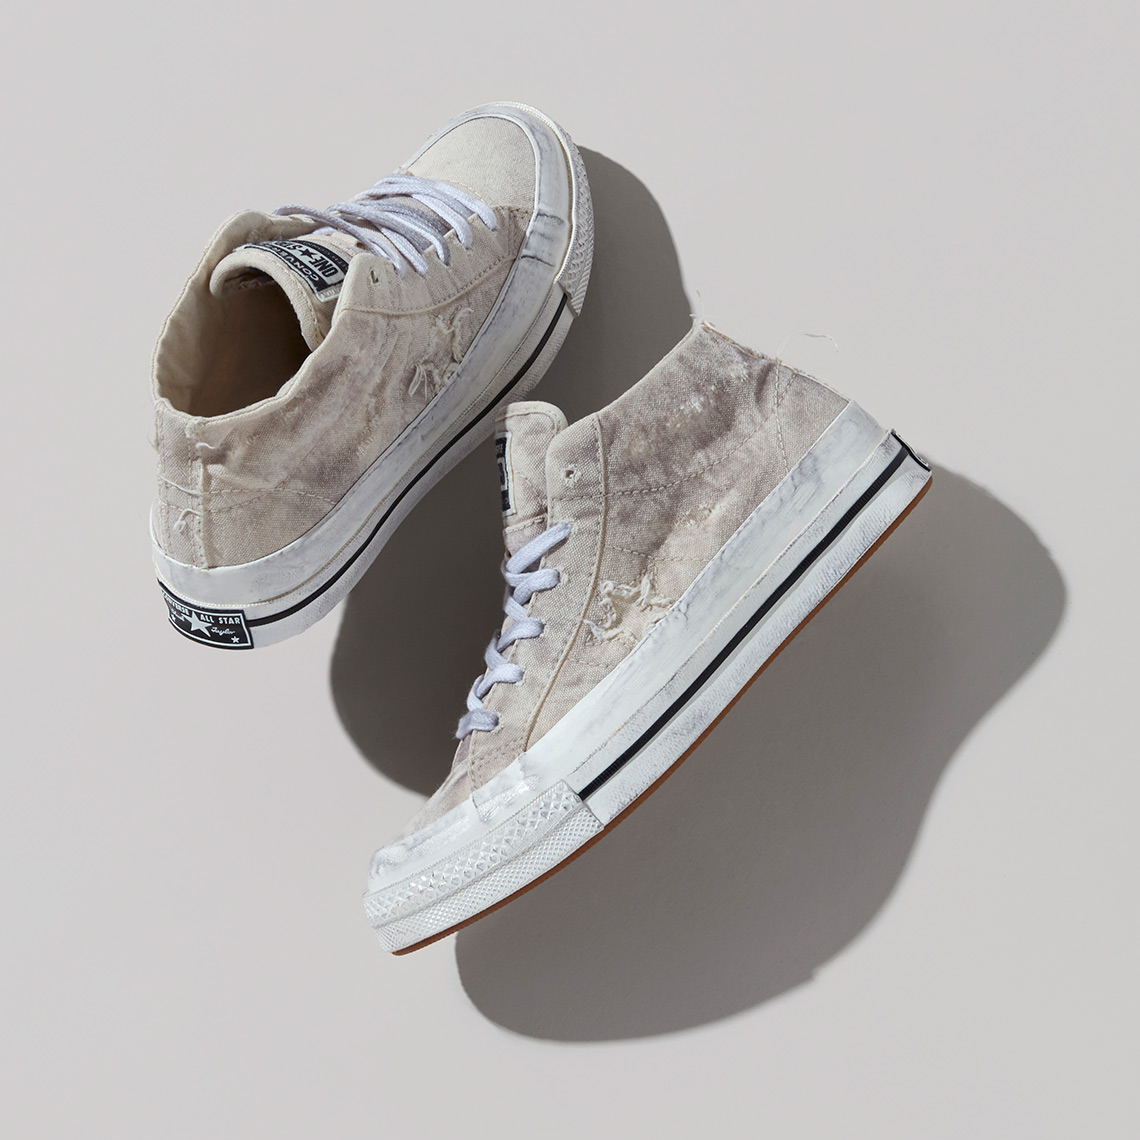 Faith Connection Converse has officially unveiled its collaboration with on the CVO LS Mid Mid